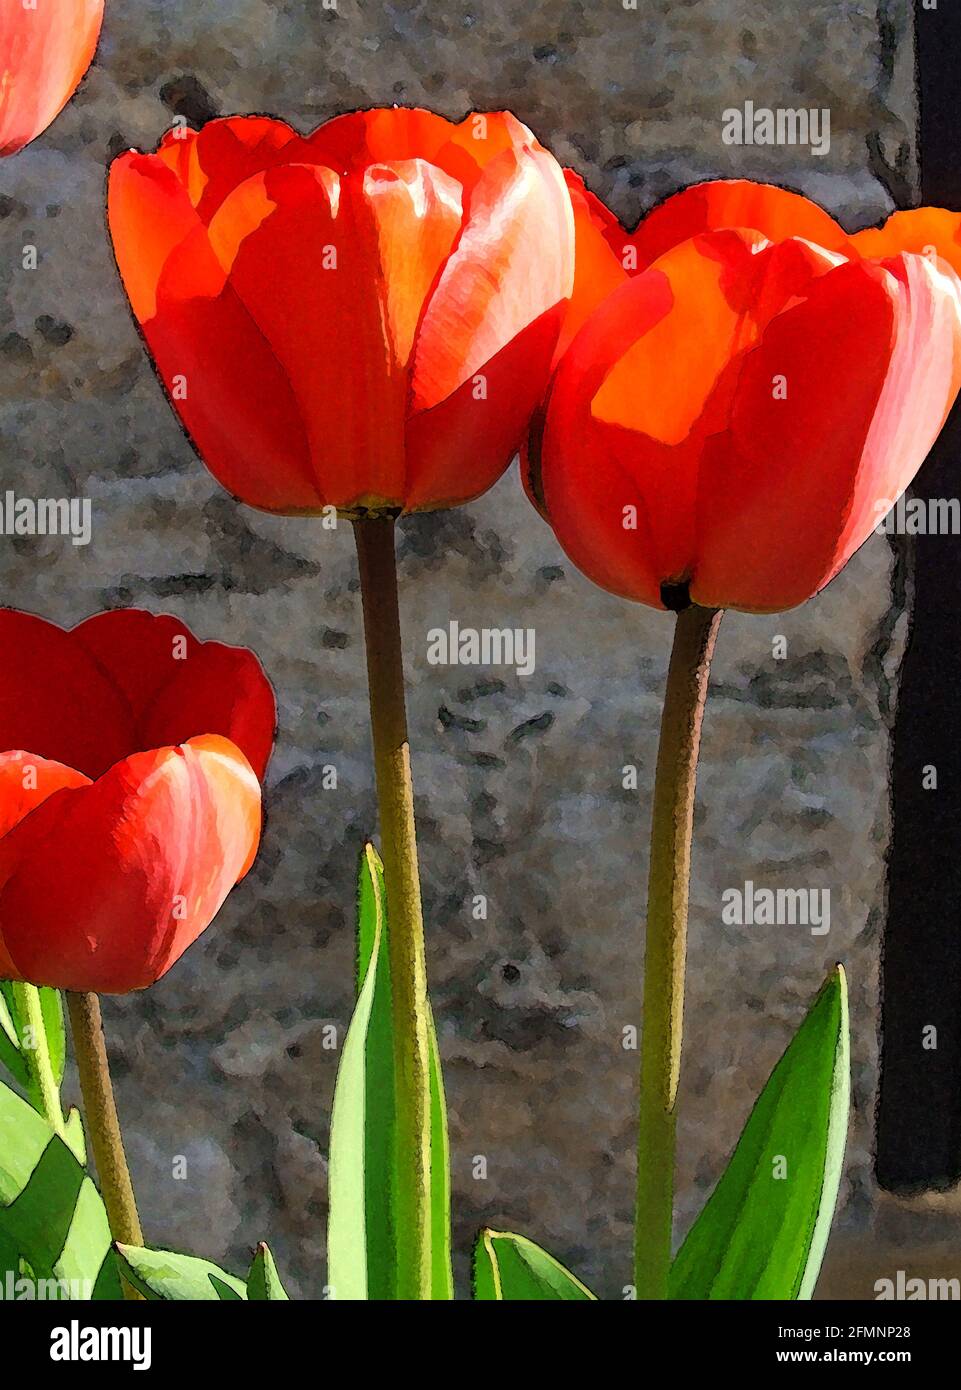 Red Tulips (Tulipa 'Apeldoorn') Darwin Hybrid. One of Forty-two Iconic Images of English Garden Flowers, Wildflowers and Rural Landscapes. Stock Photo